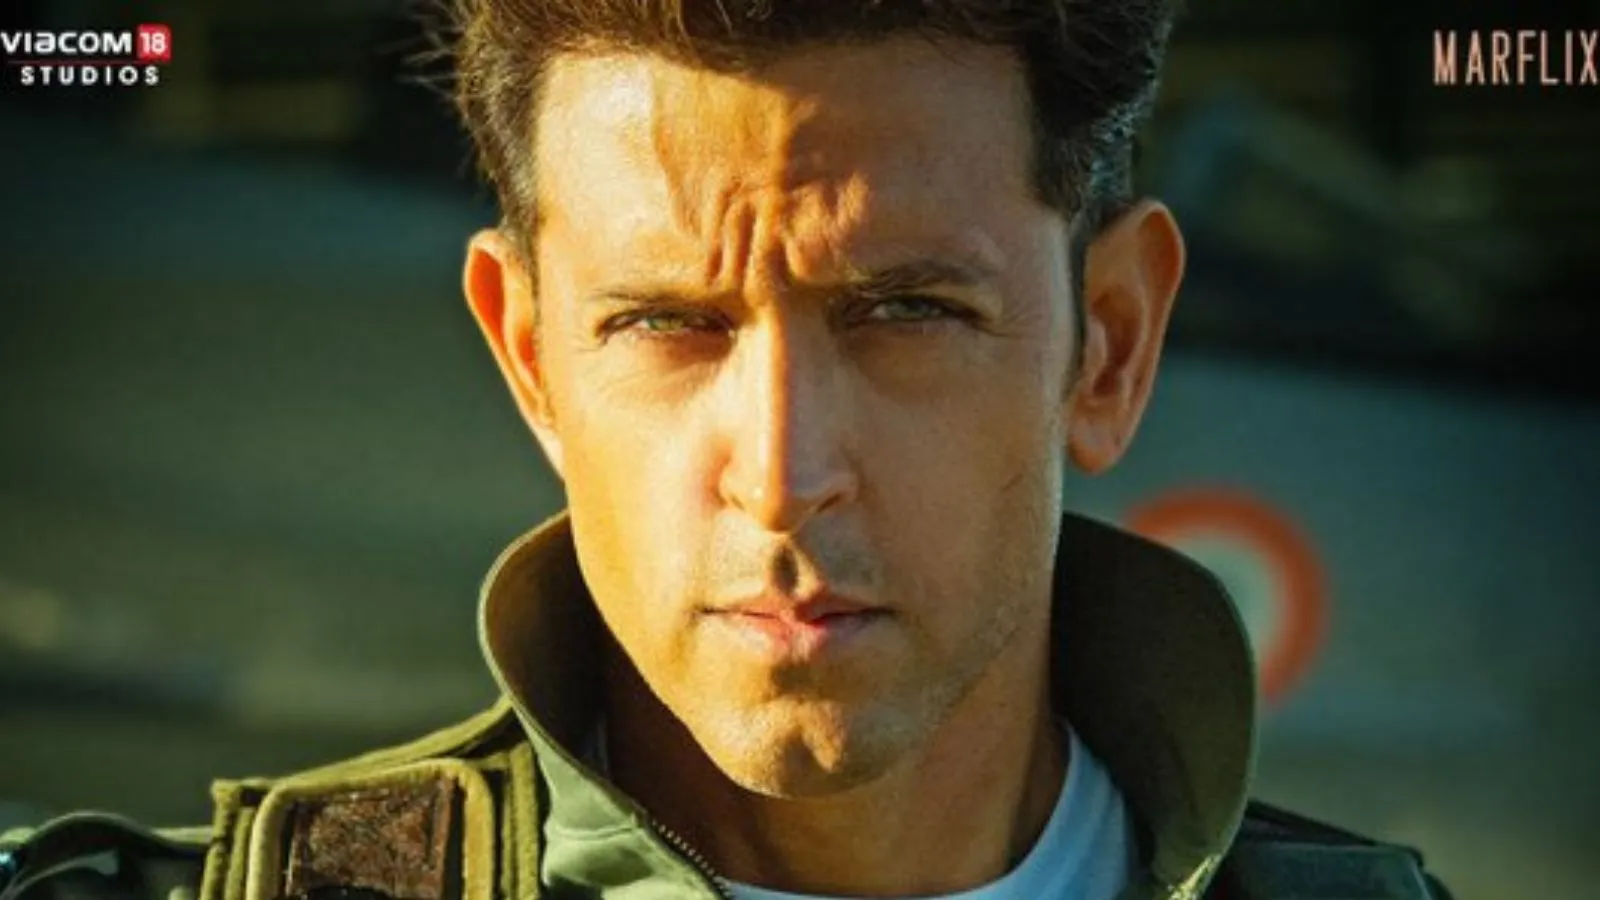 Hrithik Roshan unveils new poster of Fighter, netizens say actor 'looks  like Tom Cruise